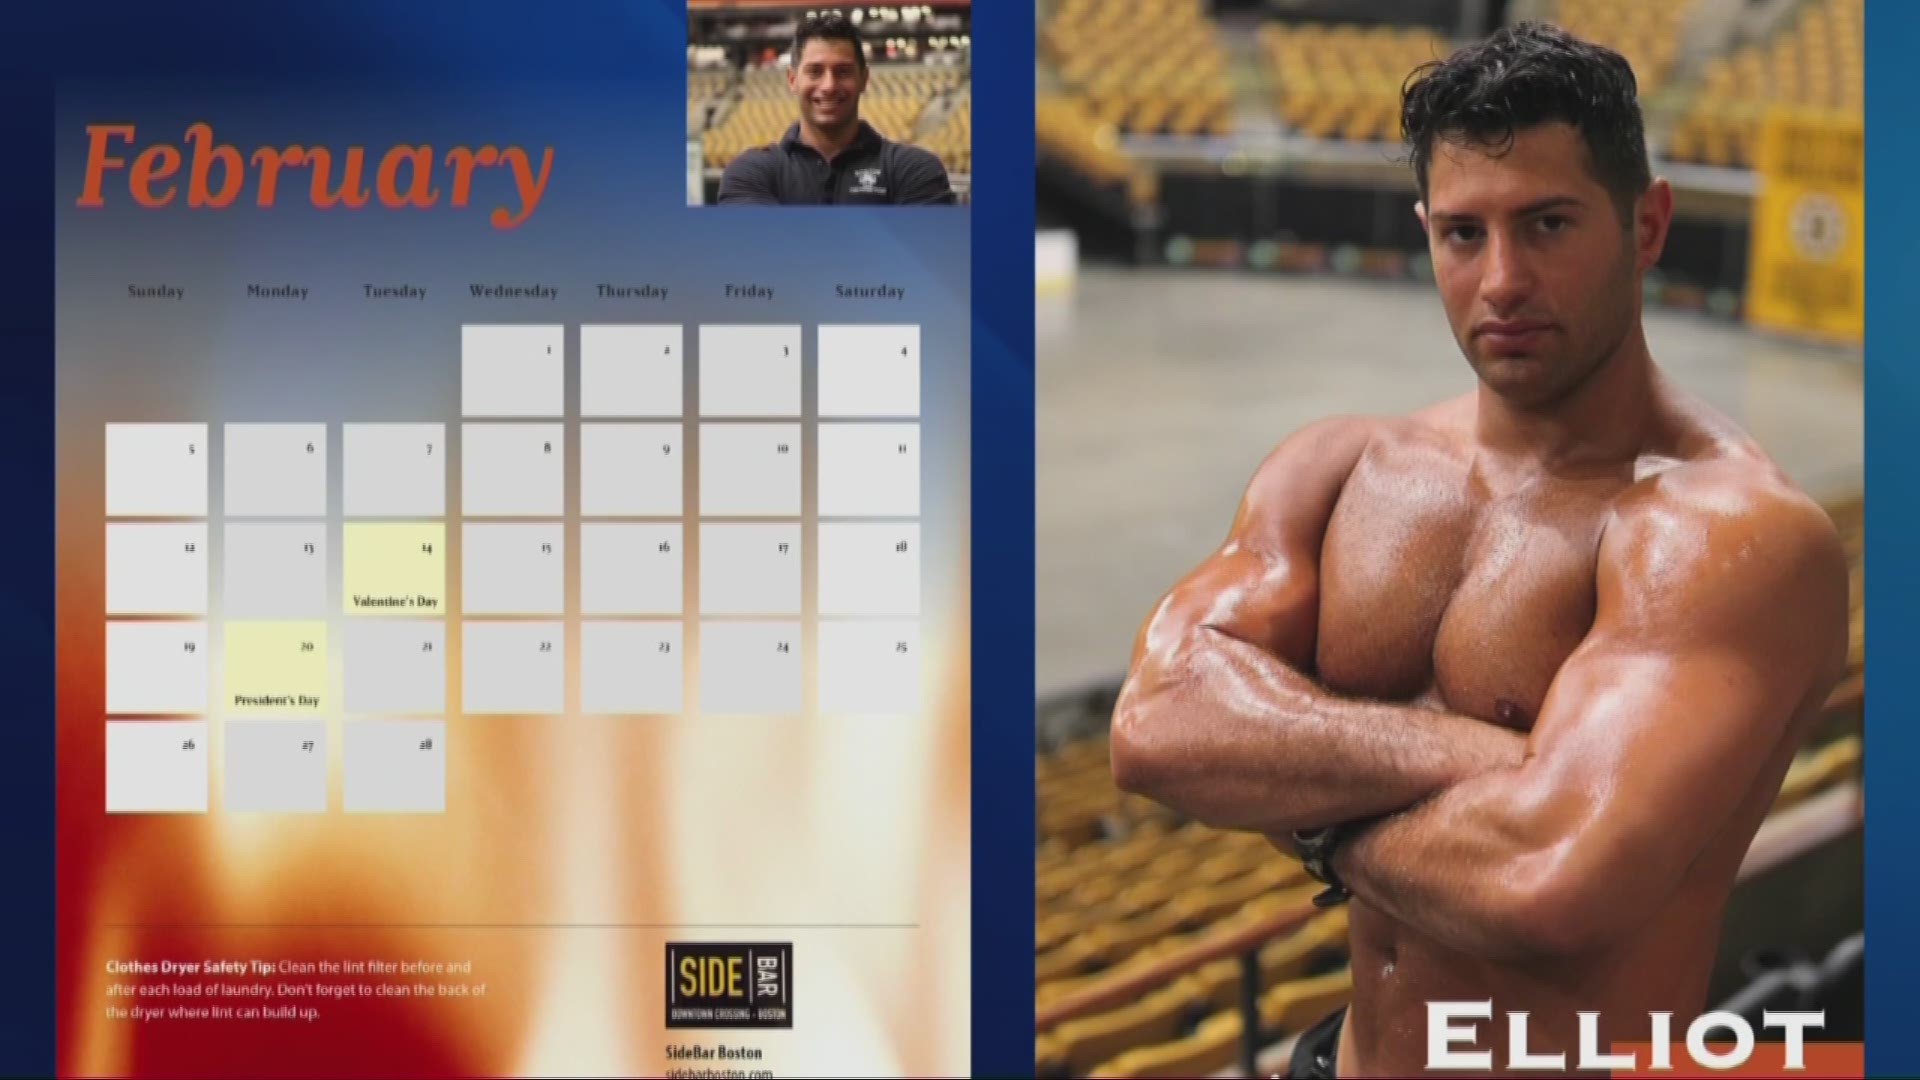 Boston firefighters release eagerly anticipated 2017 calendar to raise money for Boston Firefighters Burn Foundation.